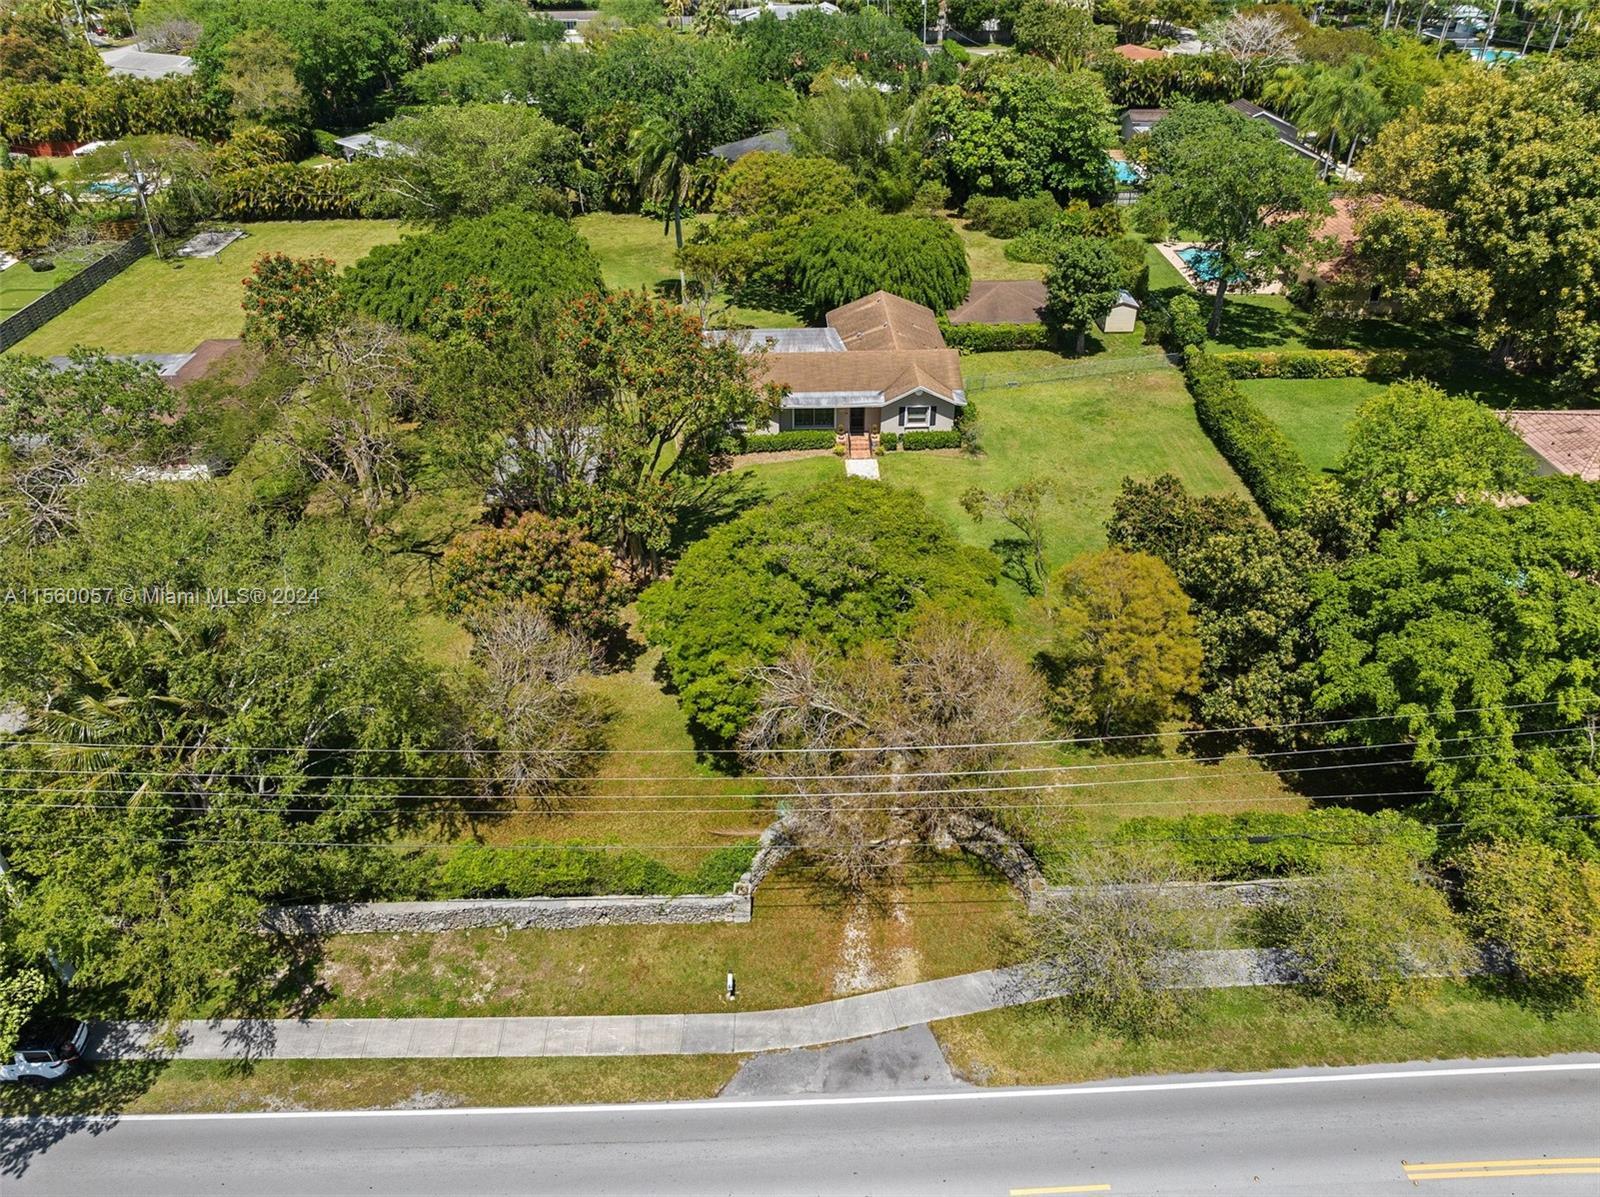 Pinecrest Investment Opportunity: This very nicely maintained 1939 ranch house rests in the center o